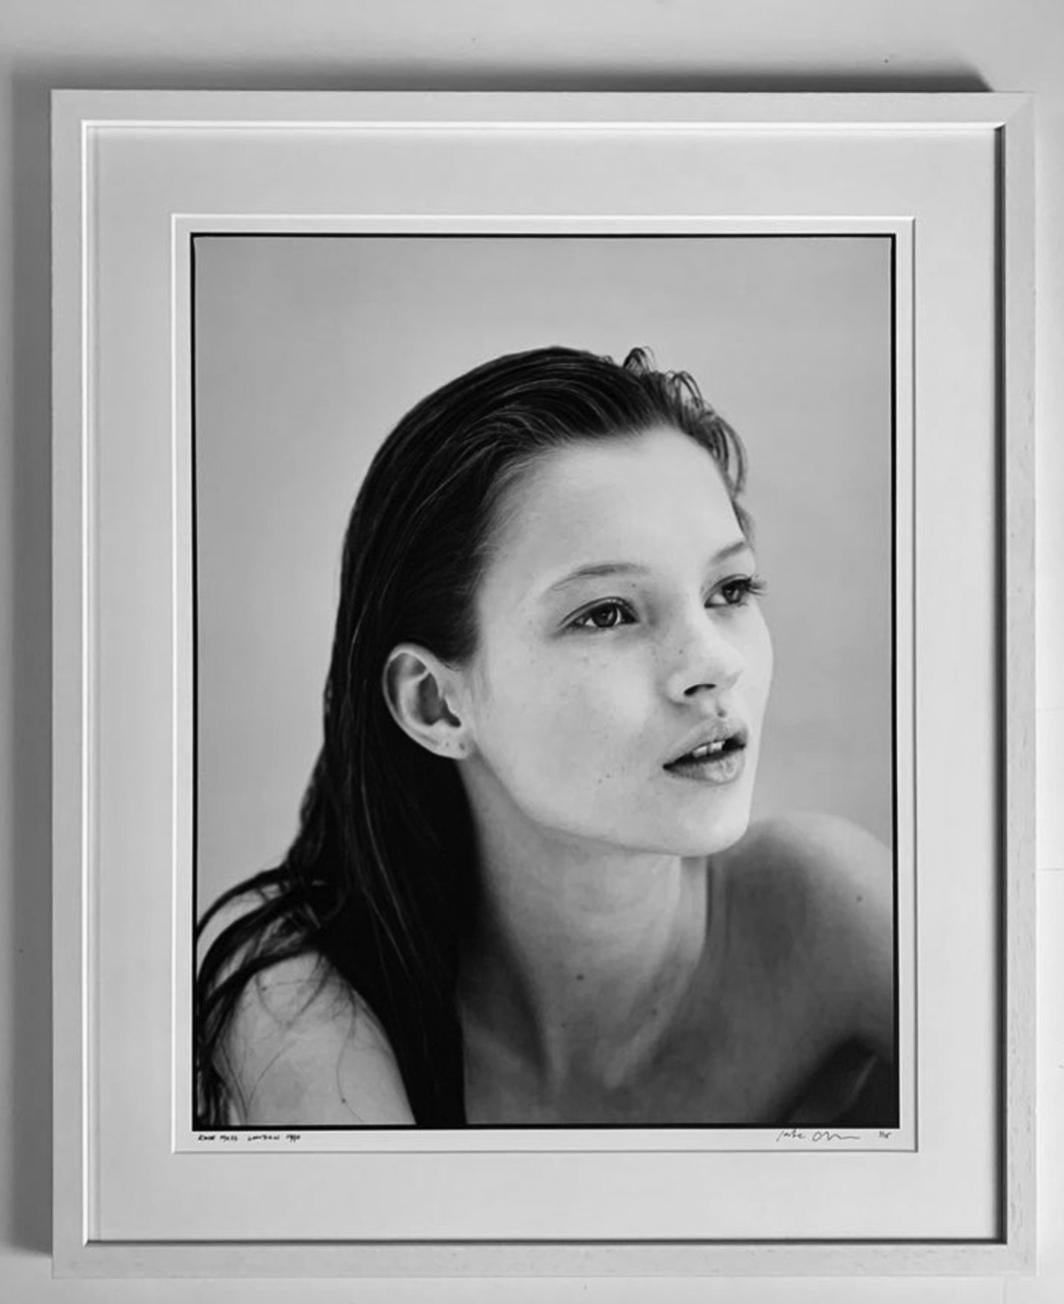 Kate Moss at 16 Side View -  Framed Archival Pigment Print  - Modern Photograph by Jake Chessum